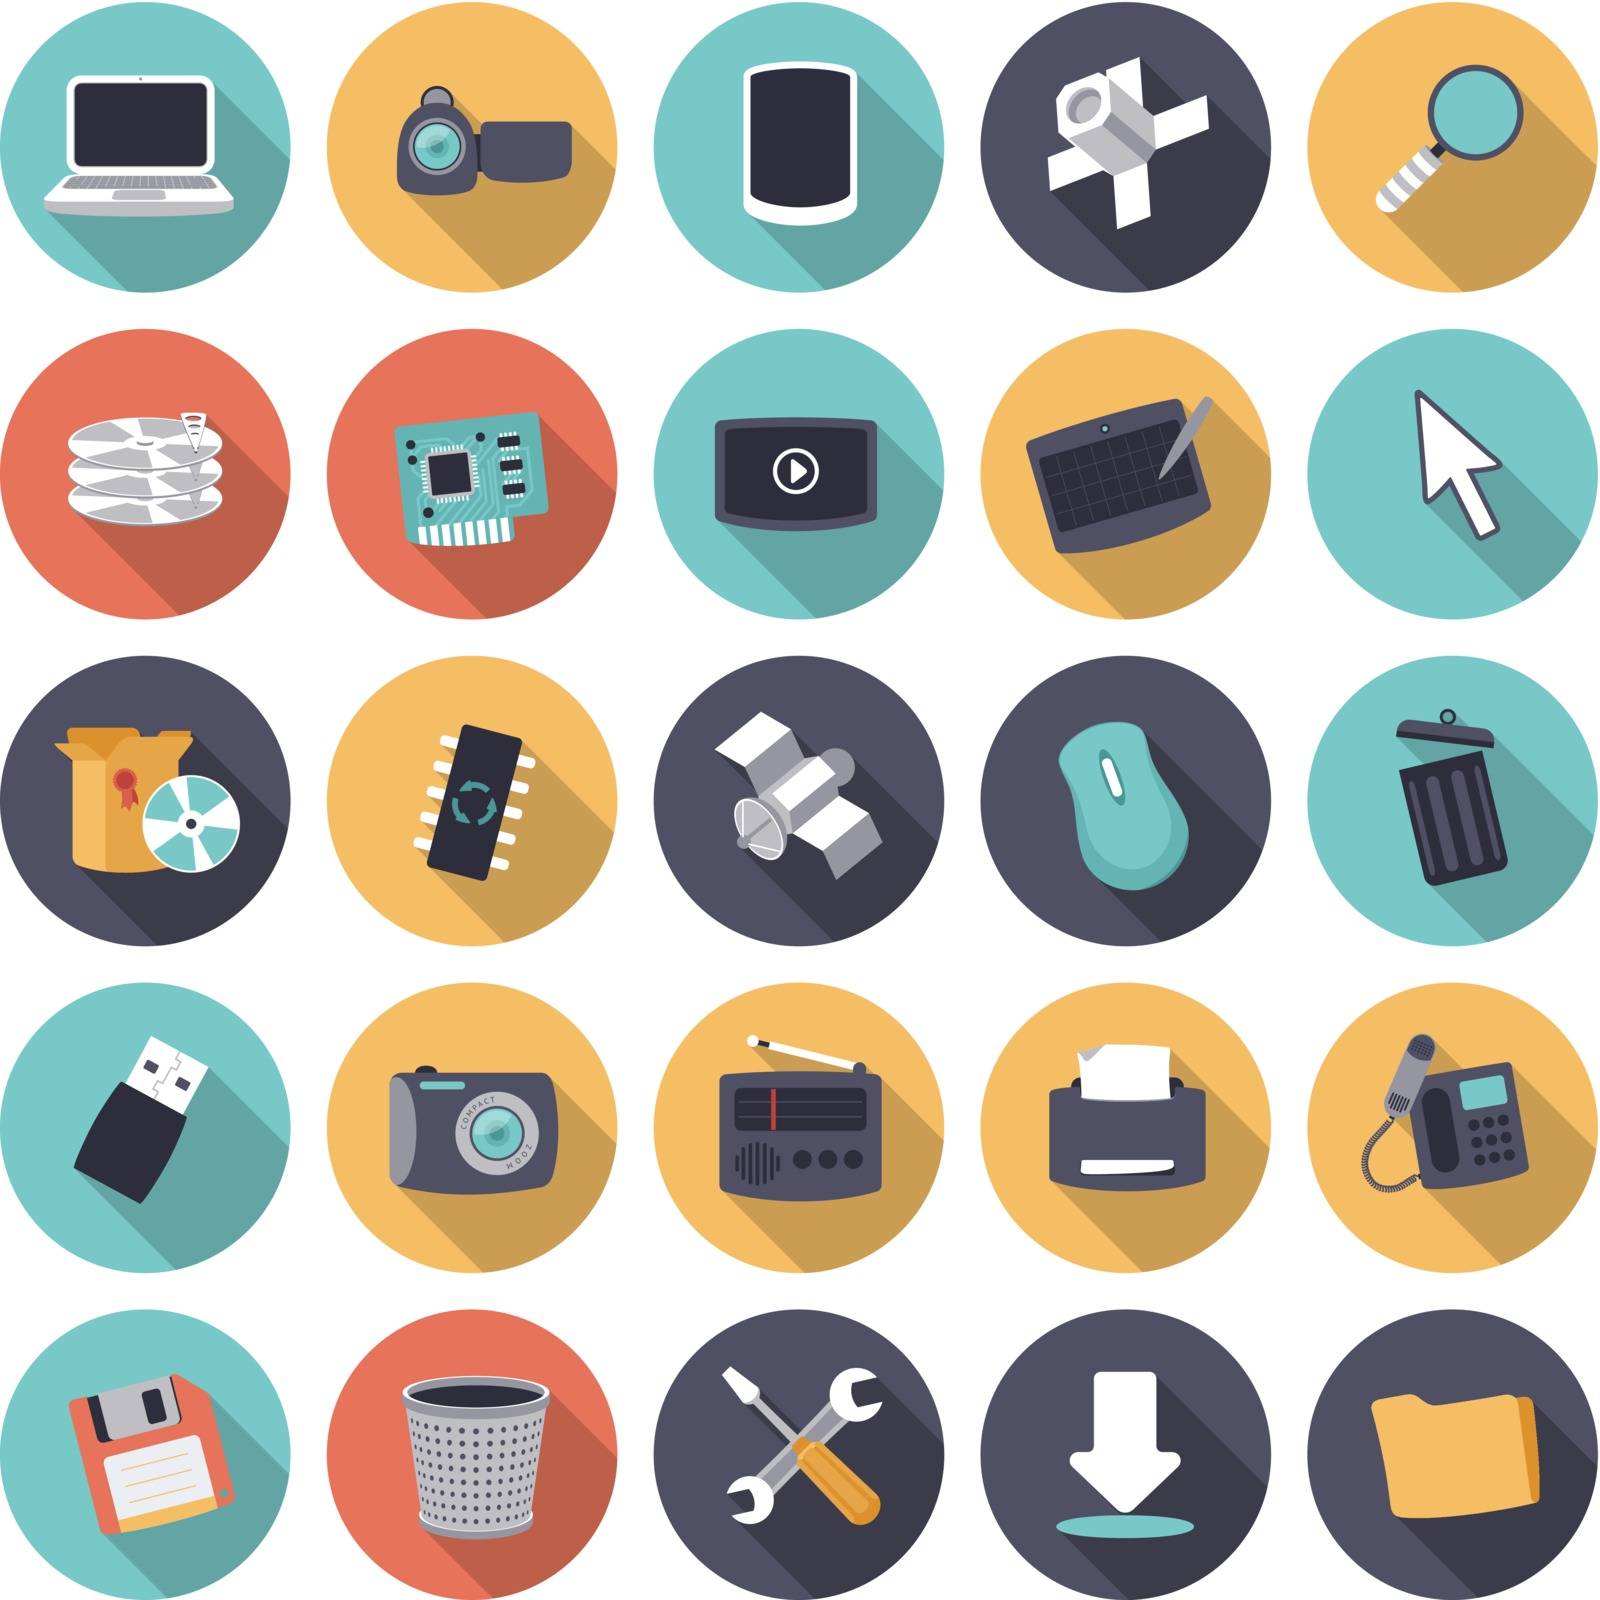 Flat design icons for technology and devices by ildogesto